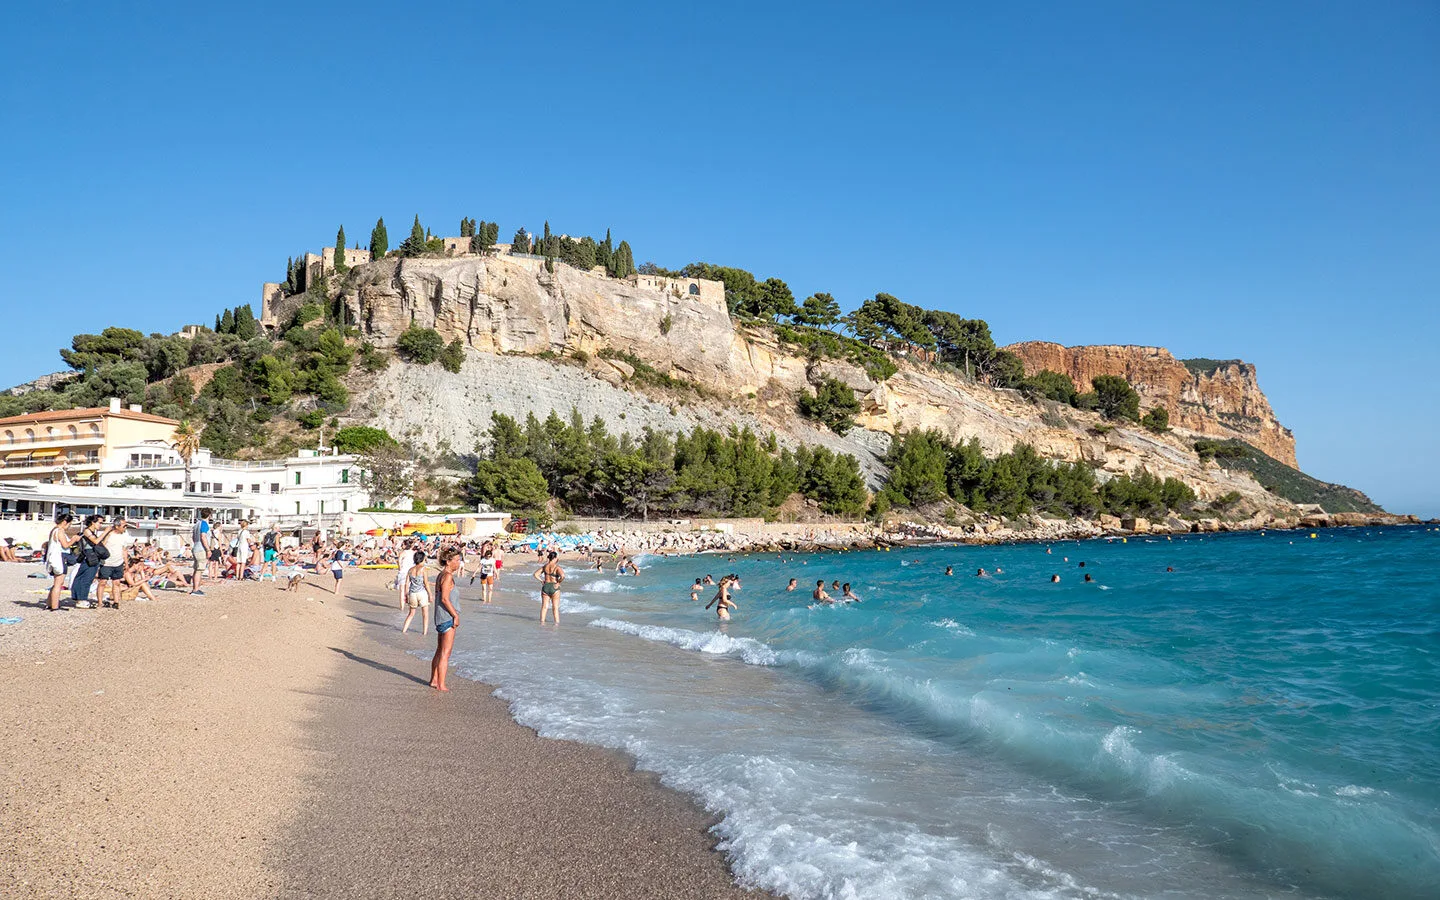 Plage de la Grande Mer beach, one of the best things to do in Cassis, South of France